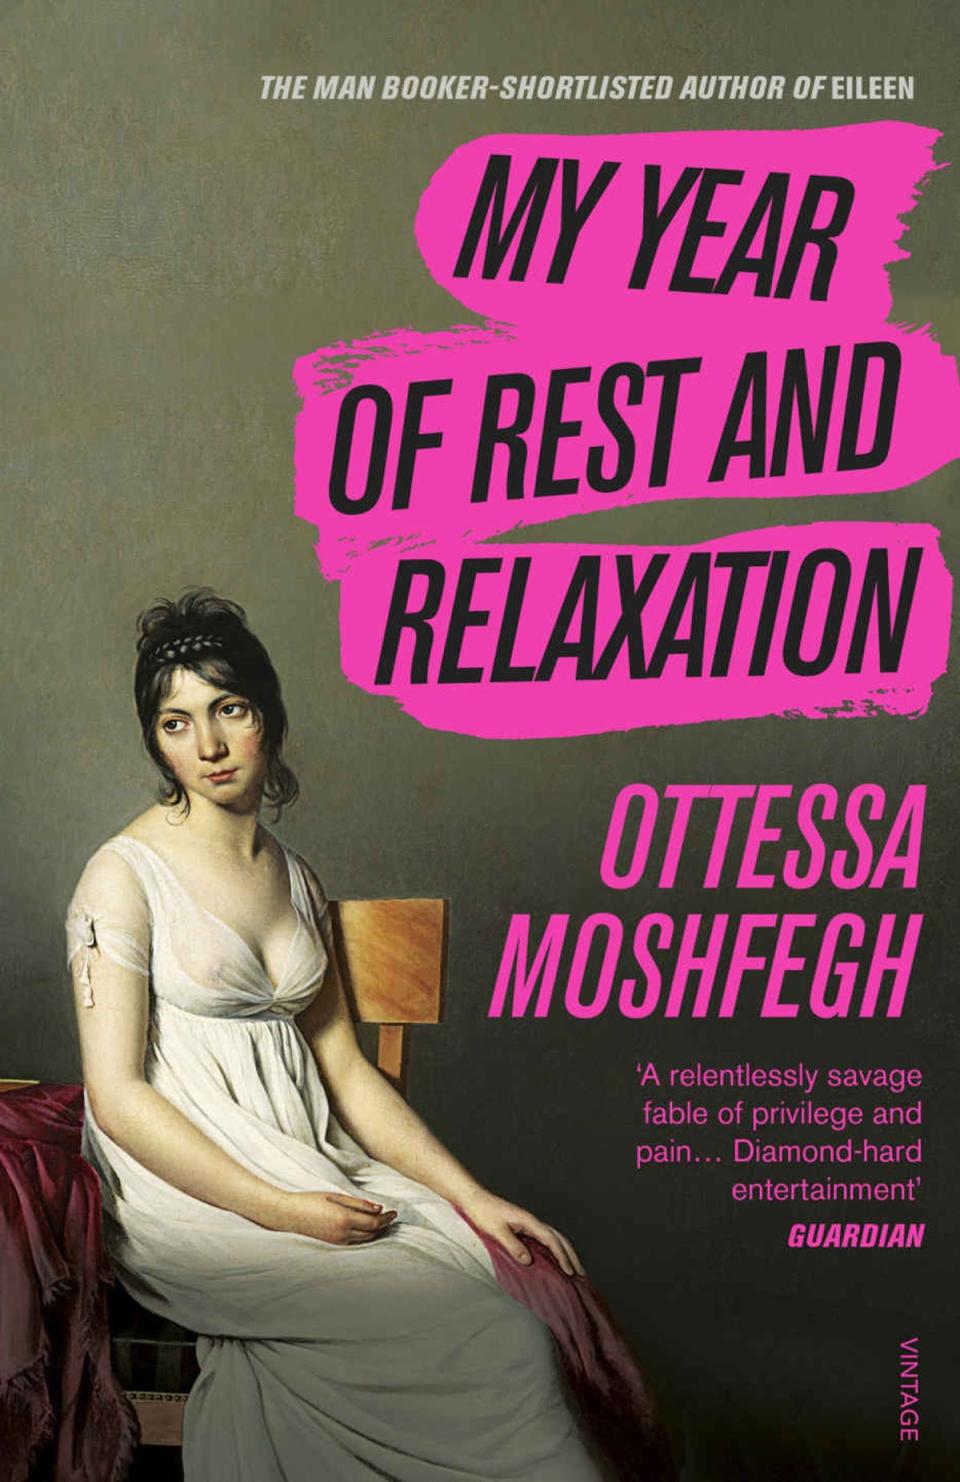 Social capital: Moshfegh’s bestselling novel and status symbol ‘My Year of Rest and Relaxation’ (Vintage)